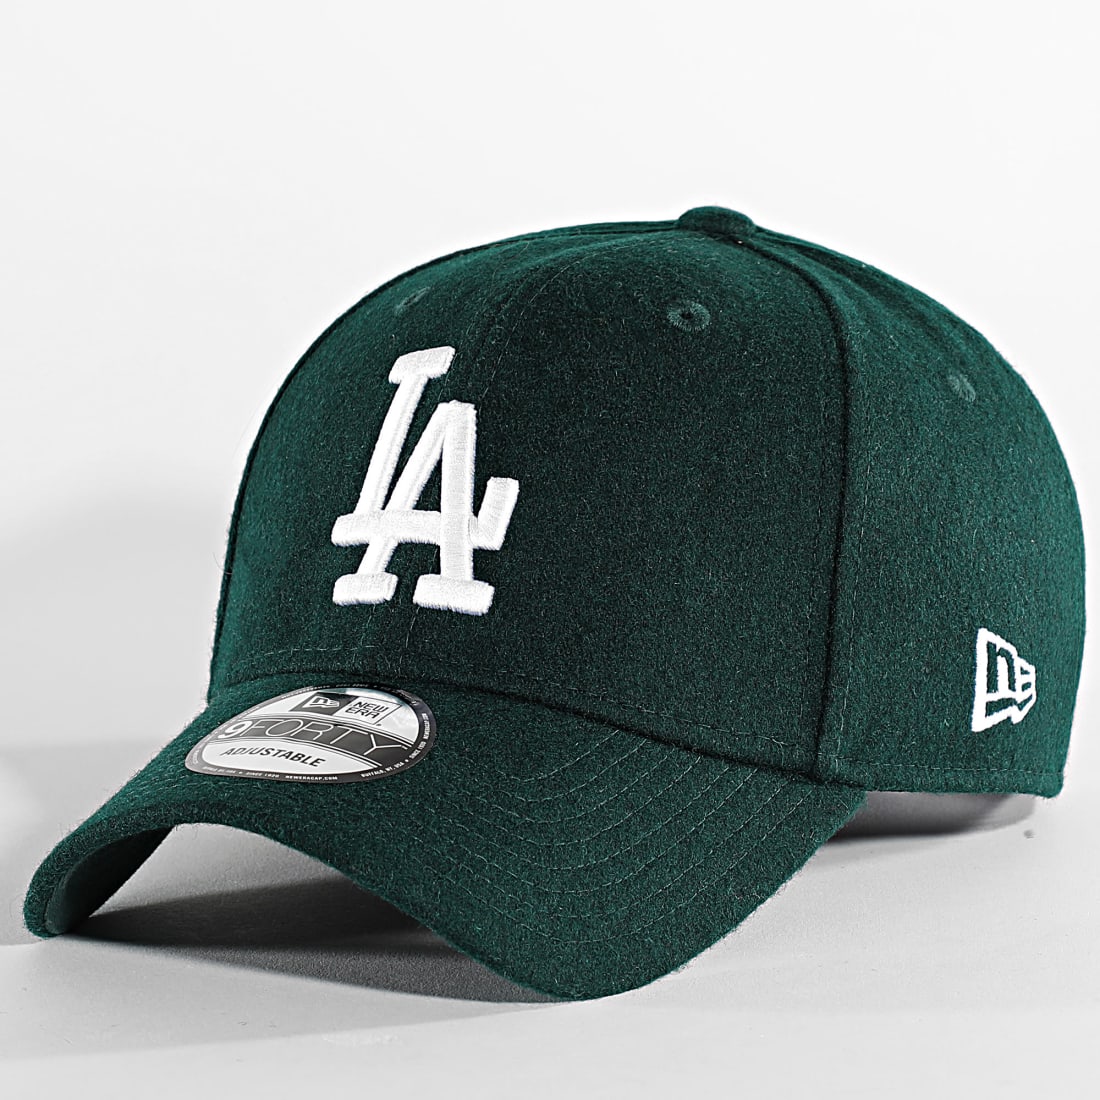 Casquette New Era LOS ANGELES DODGERS ESSENTIAL 9FORTY